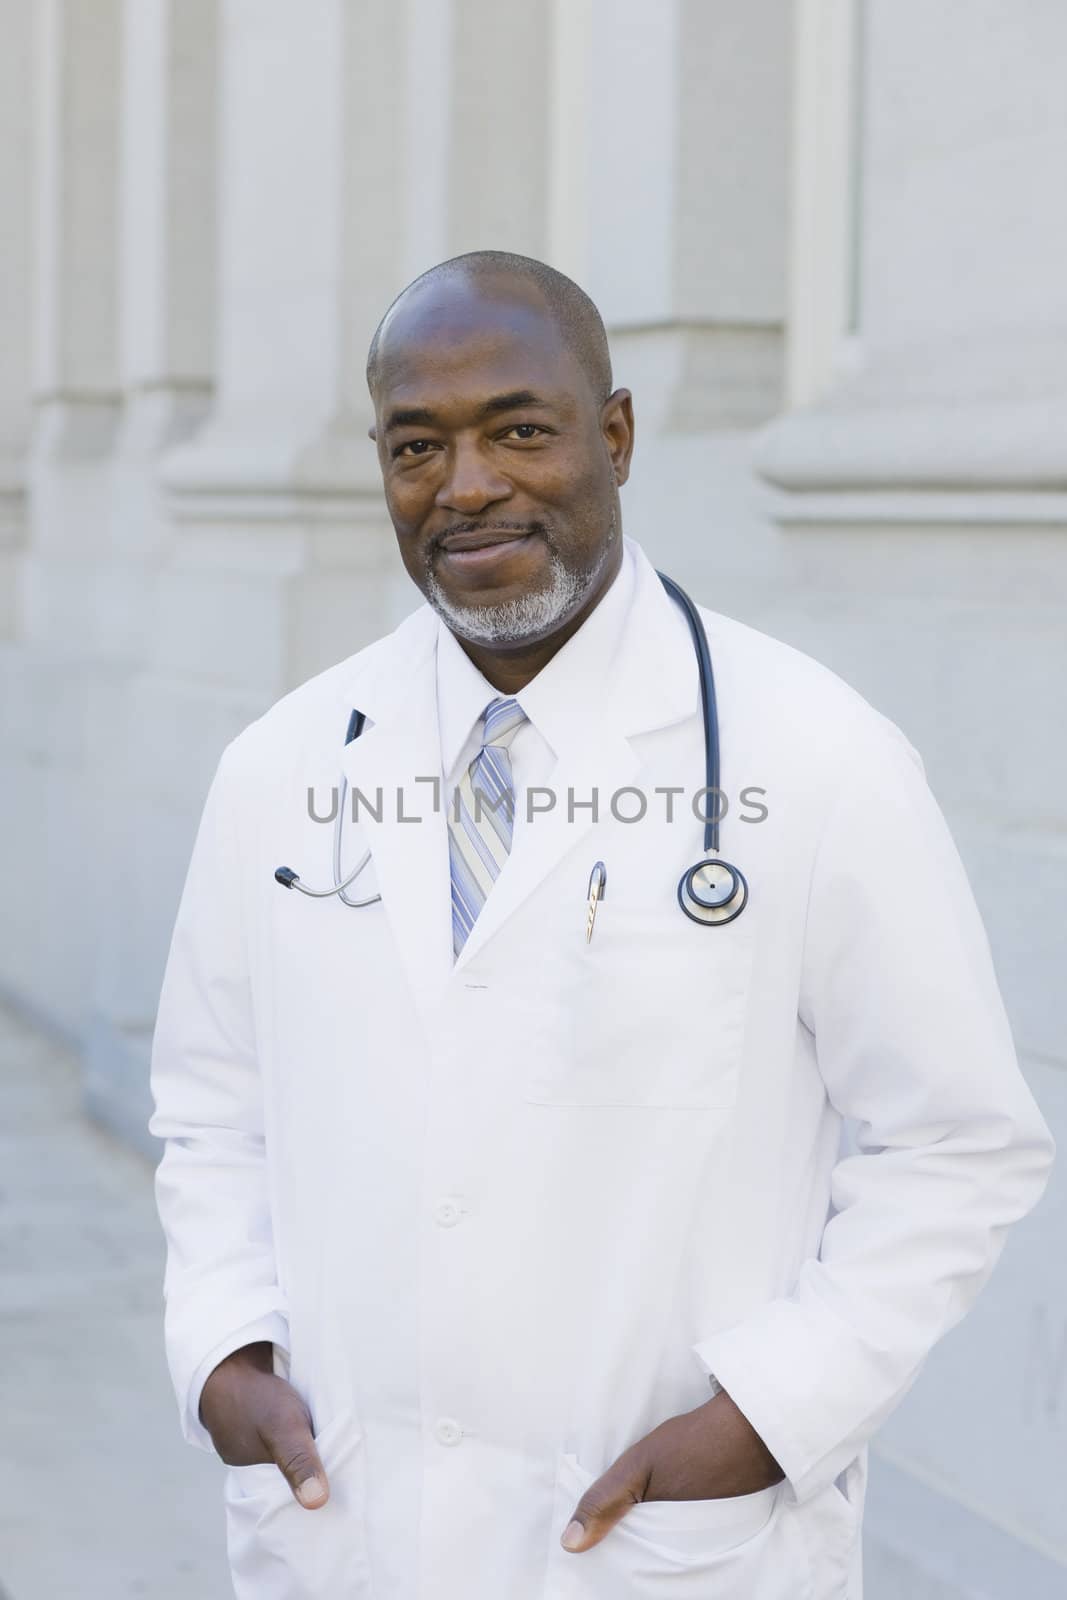 Doctor Standing Outside With Stethoscope Around Neck